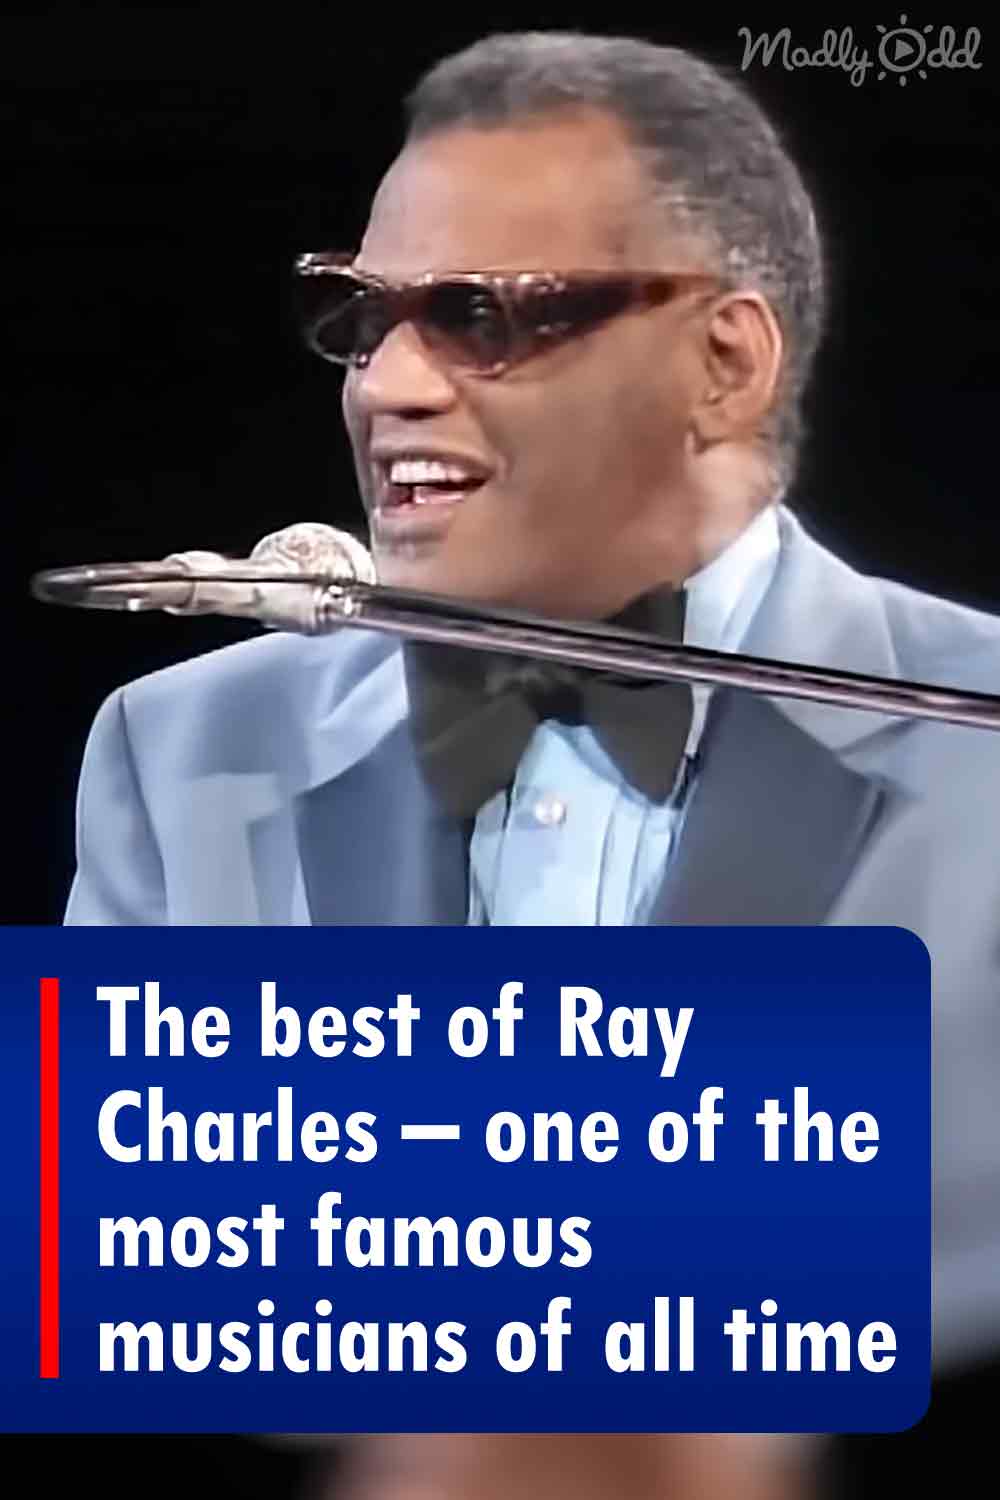 The best of Ray Charles – one of the most famous musicians of all time